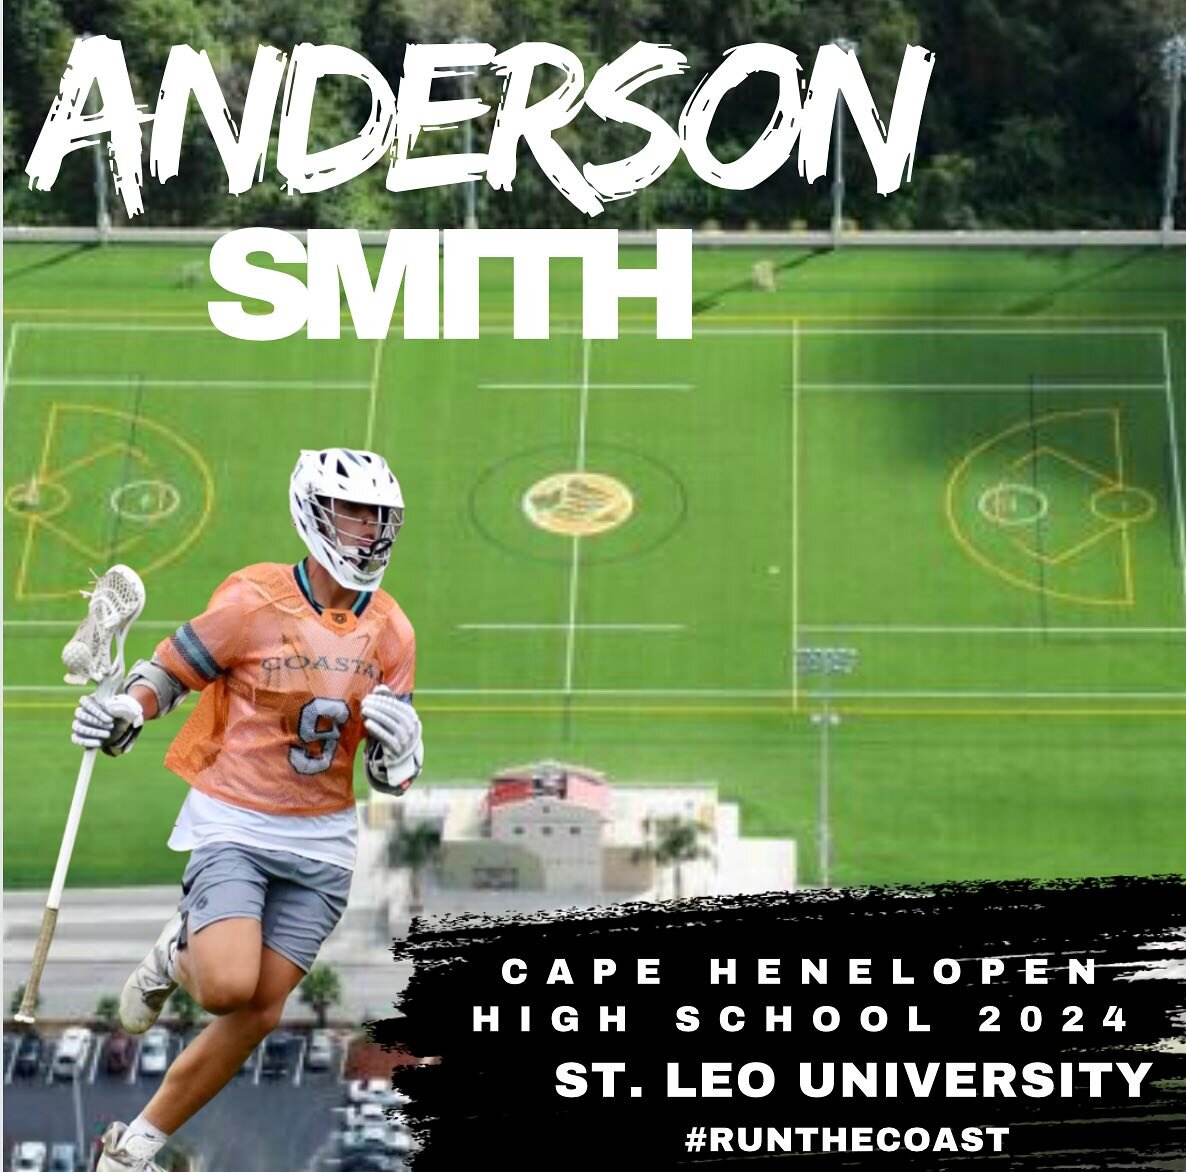 Congratulations to Anderson Smith on his commitment to play college lacrosse at St Leo University in Florida! There&rsquo;s no doubt he&rsquo;s going to make an impact down there and excel at the next level! Congrats @anders0n.smith !🔱🥍🧡🩵
#RunThe